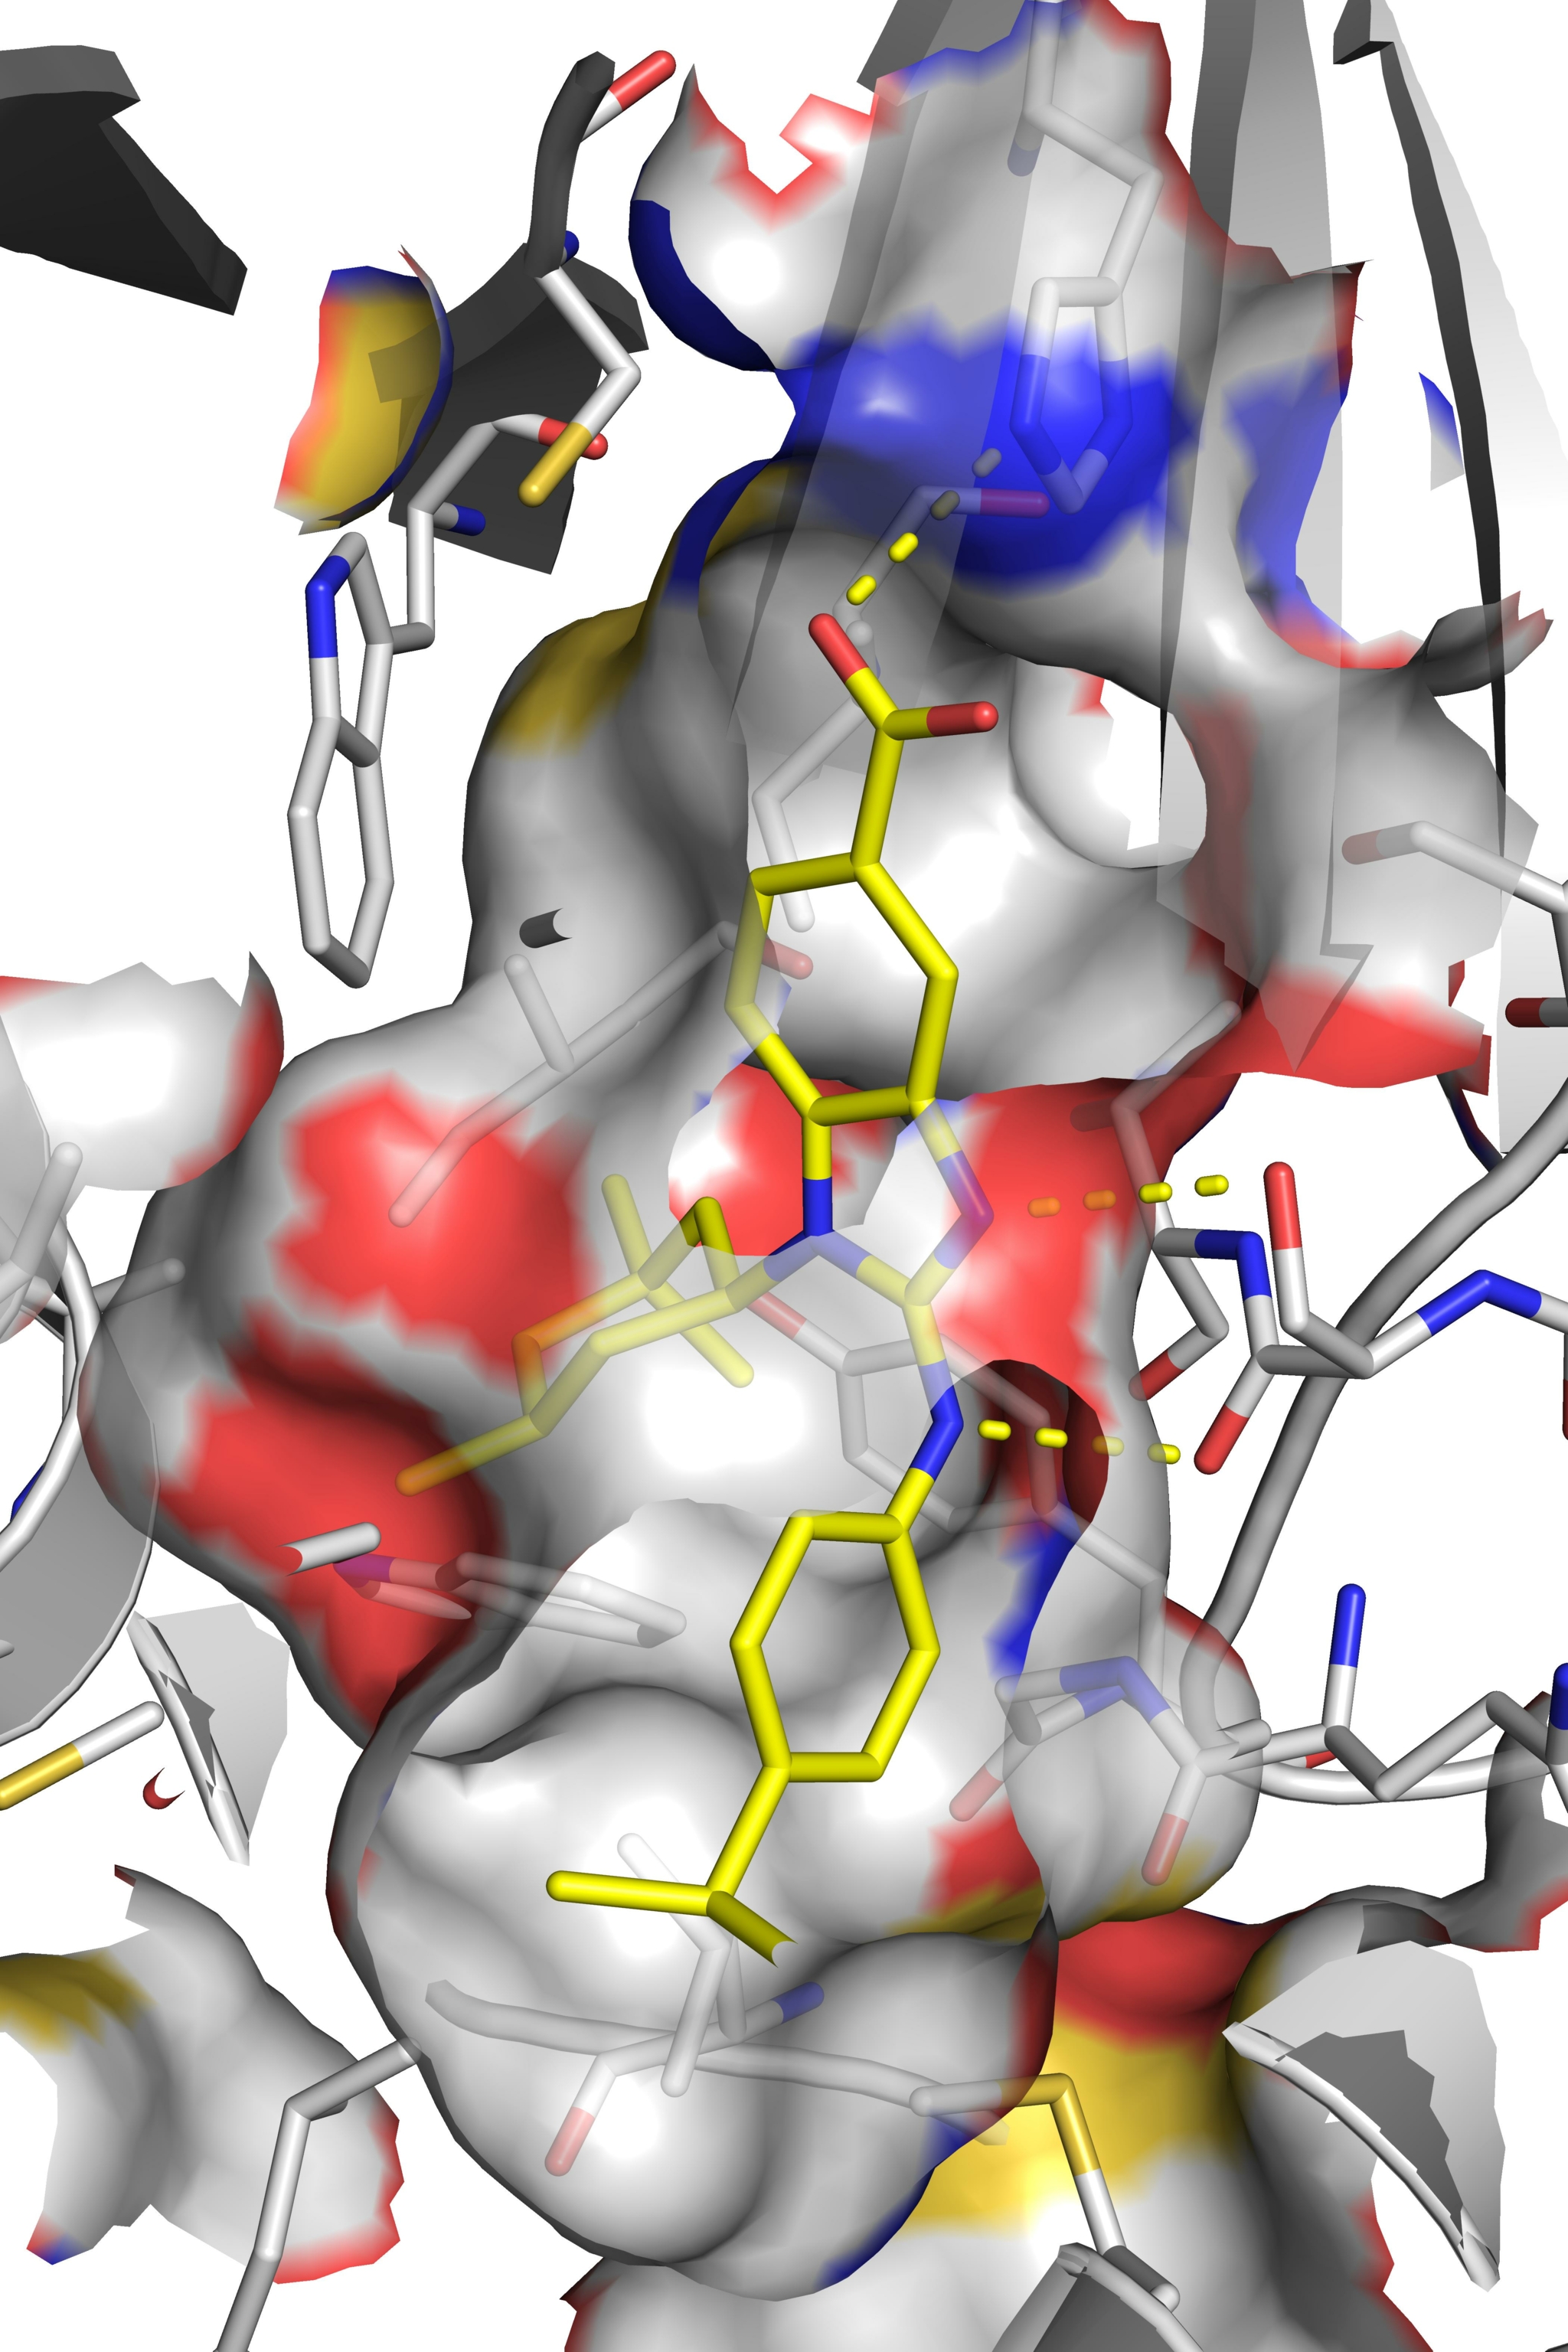 BAY 1436032 (yellow) binds to the mutated enzyme IDH1.